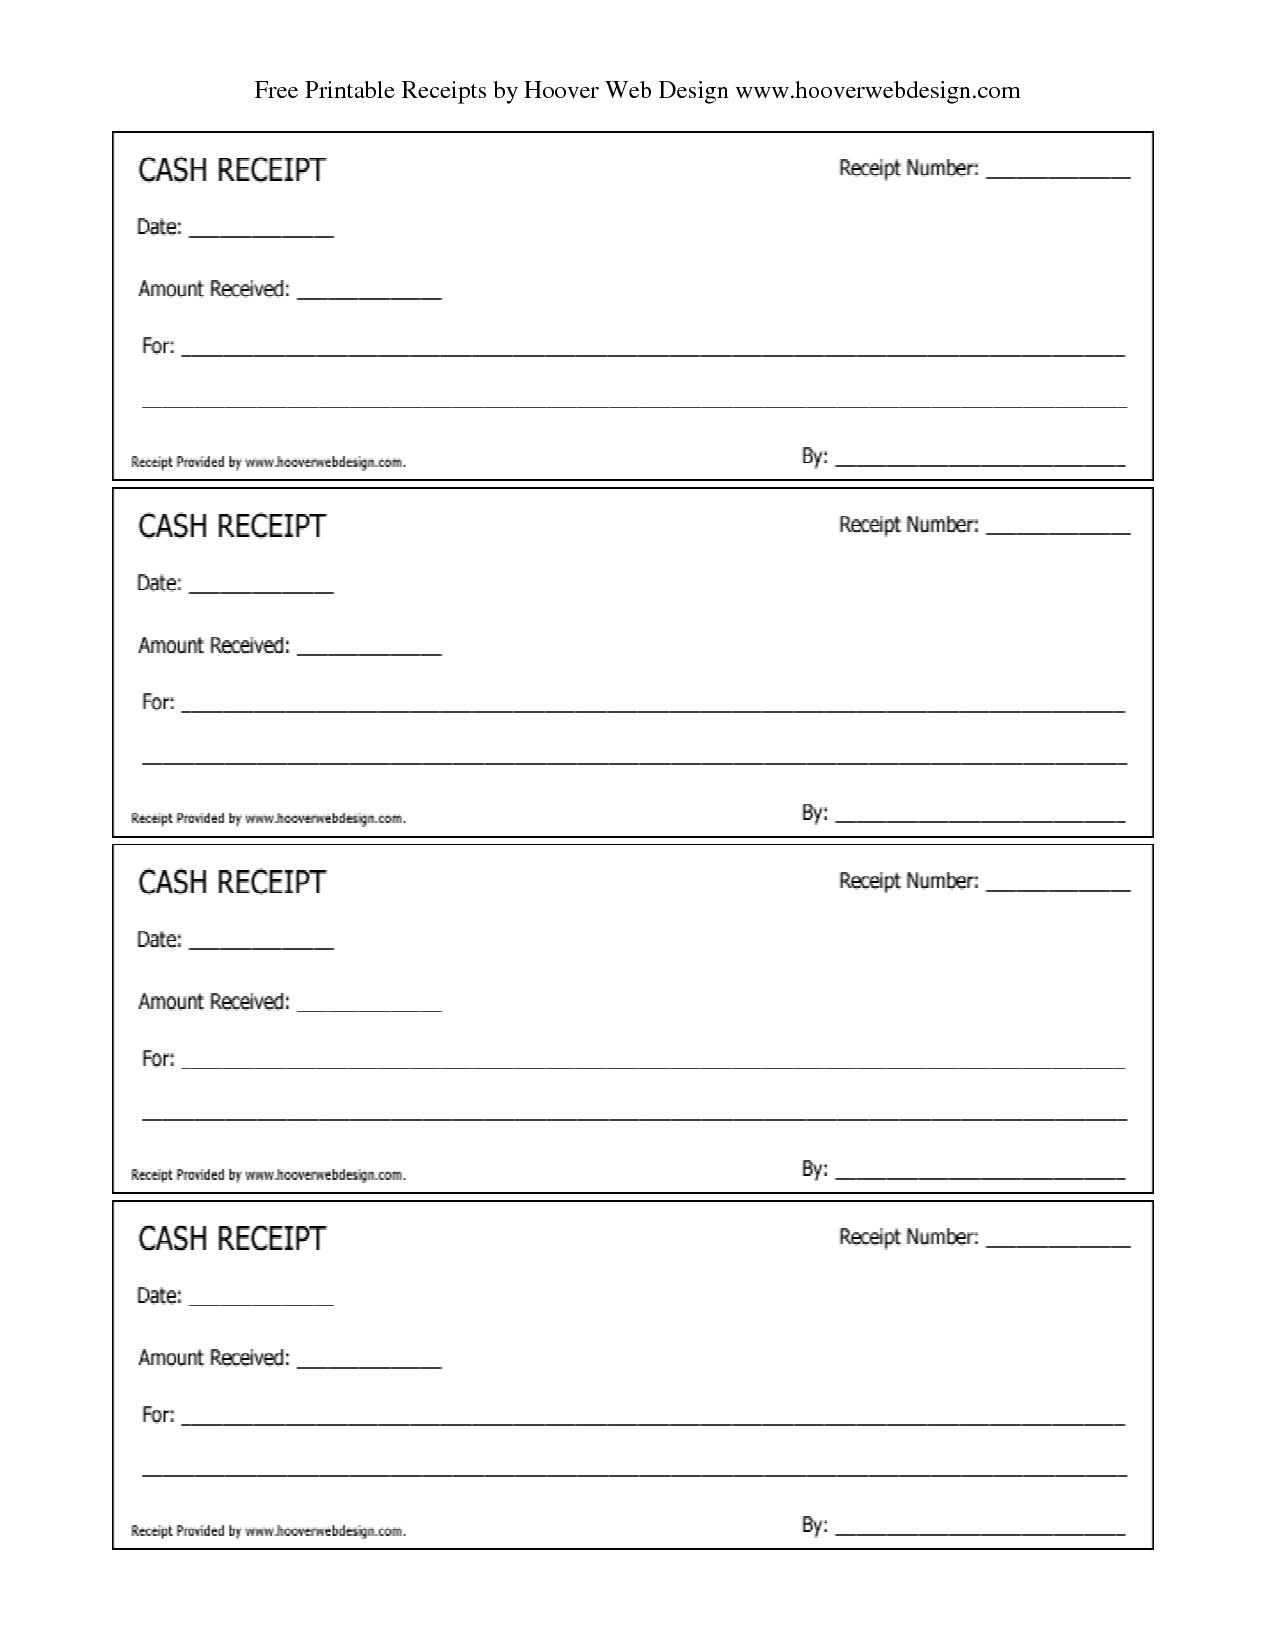 7-best-images-of-free-printable-play-receipts-free-receipt-template-word-the-let-s-play-store